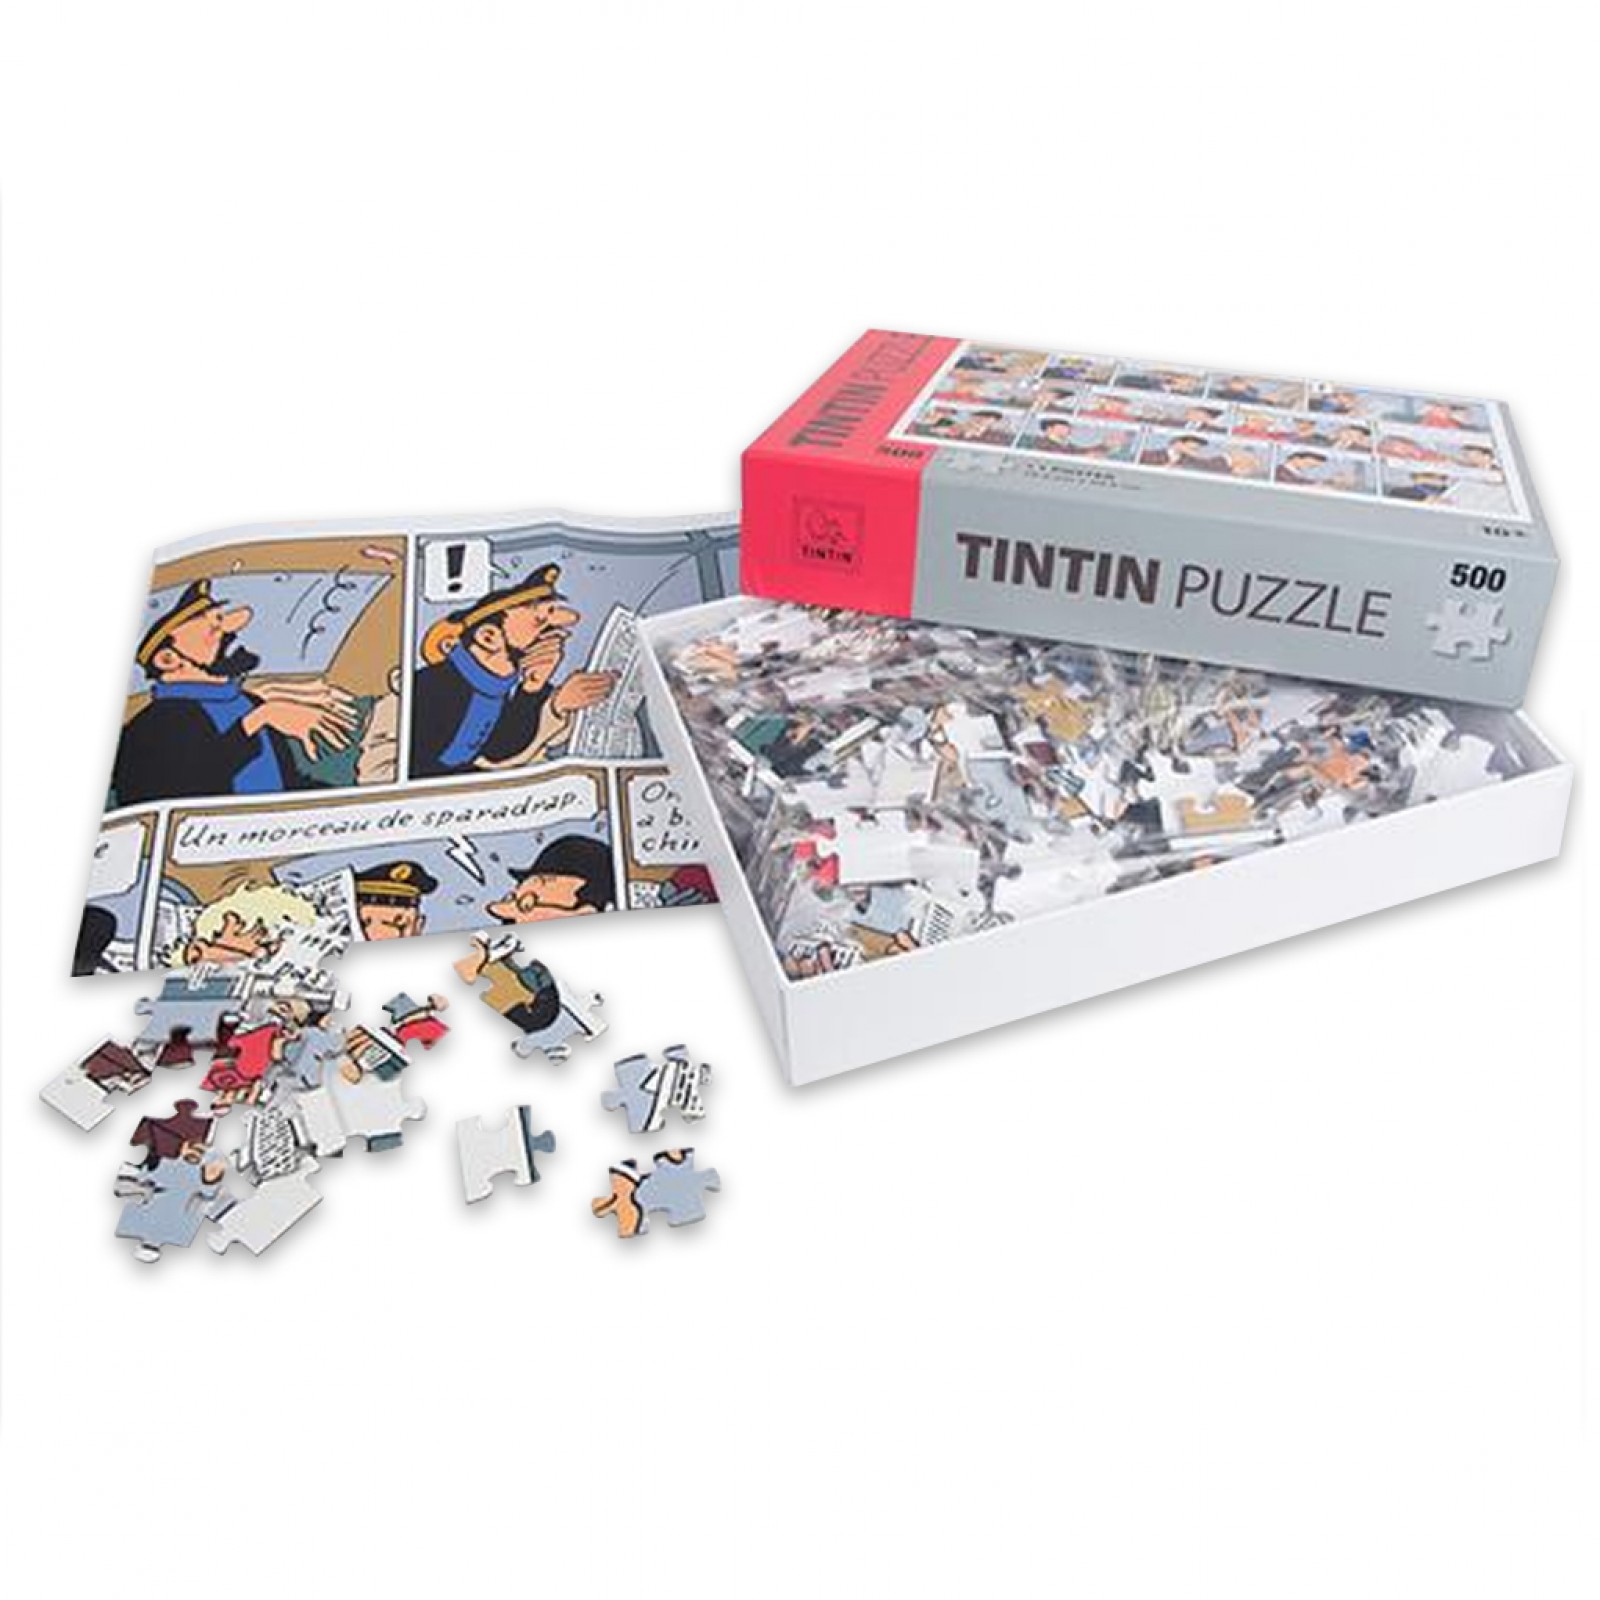 Tintin puzzle Parade Limousine 1000 pieces - Games - CARTOONS IN A BOX -  Store